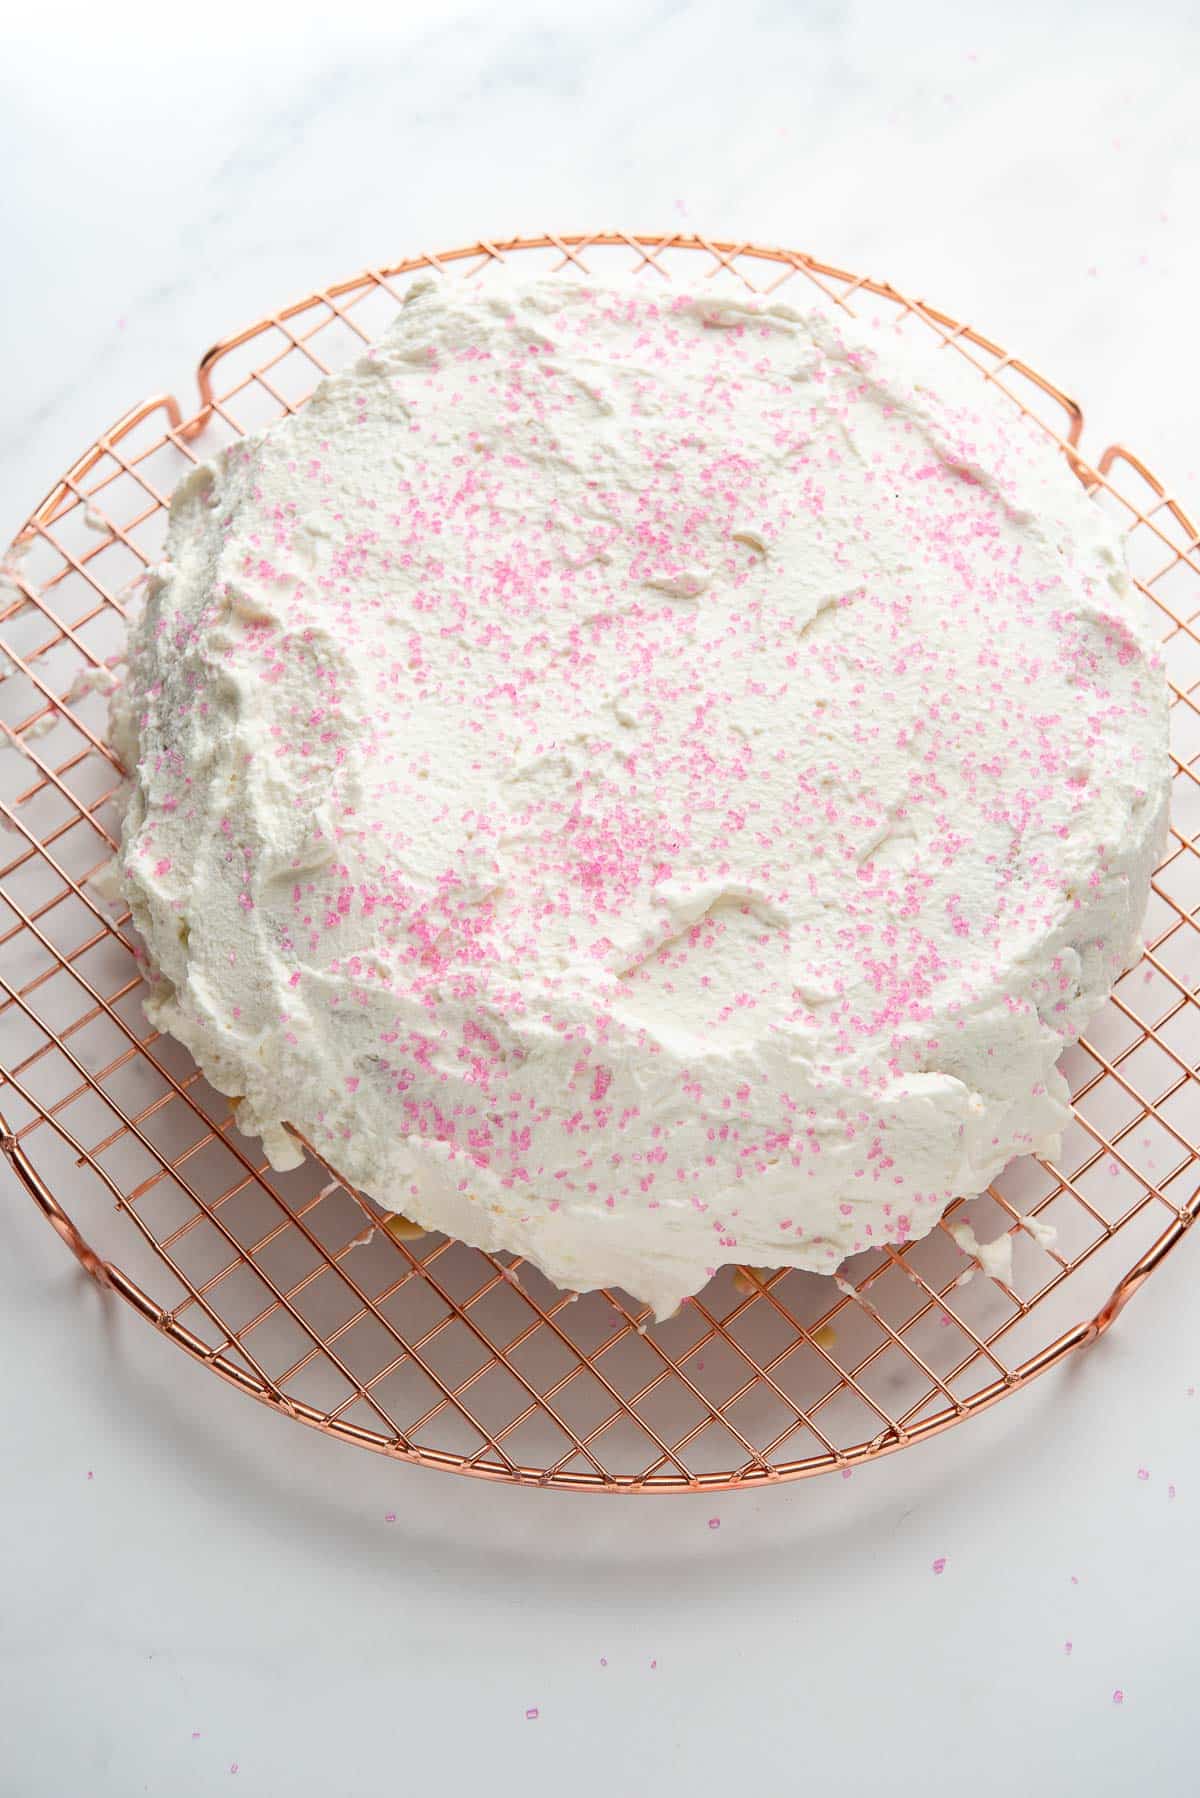 tres leches cake with pink sprinkles